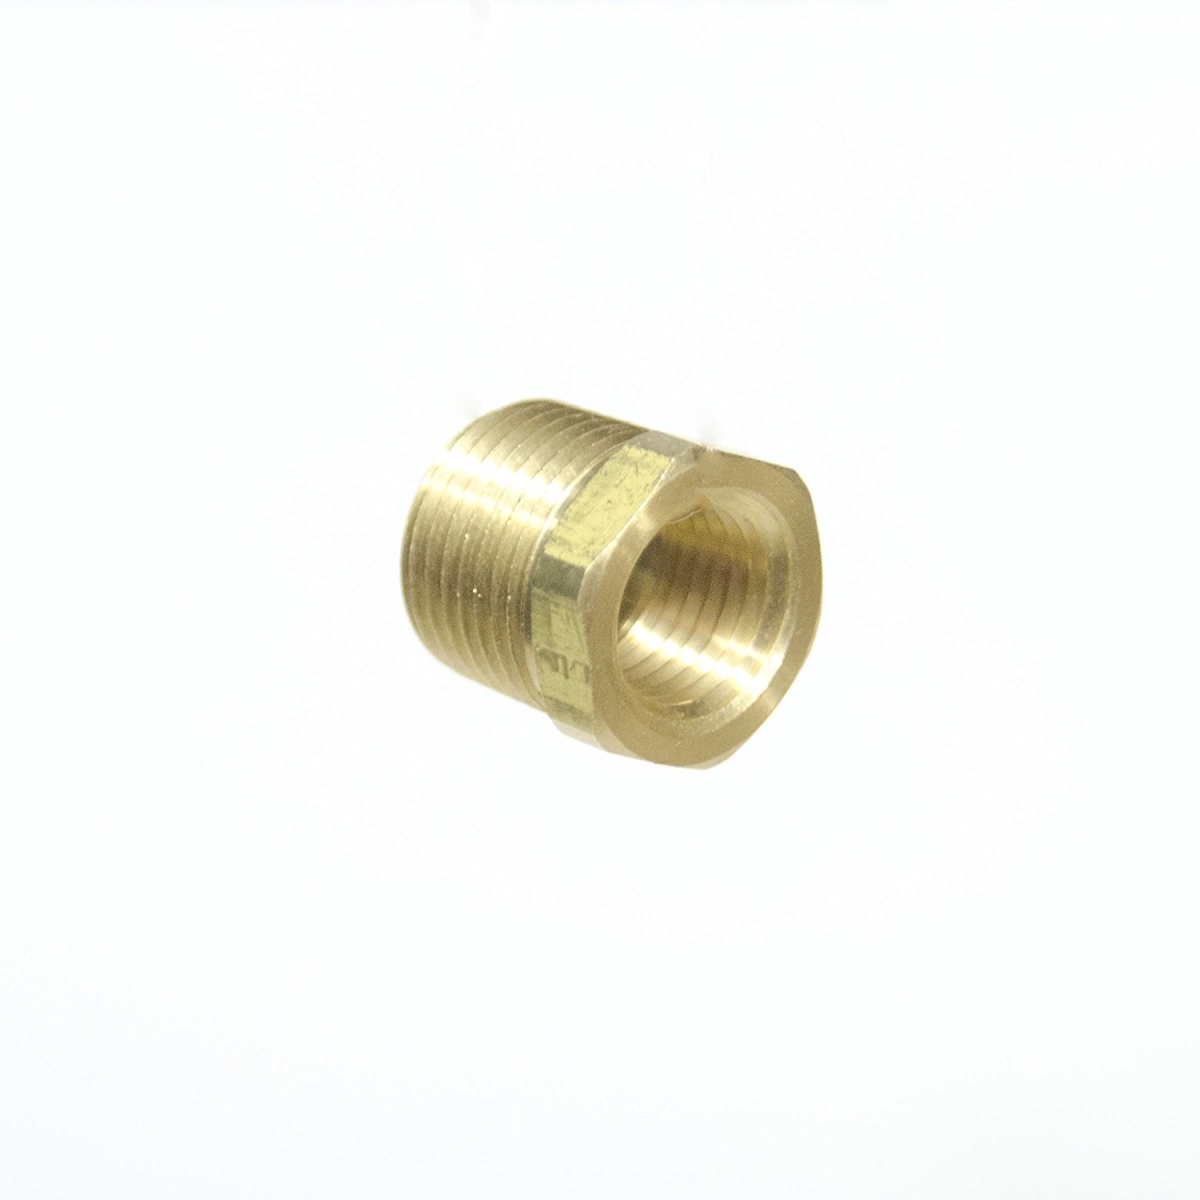 Ander Metal A6p-110acb 0.375 X 0.25 In. Brass Adaptor